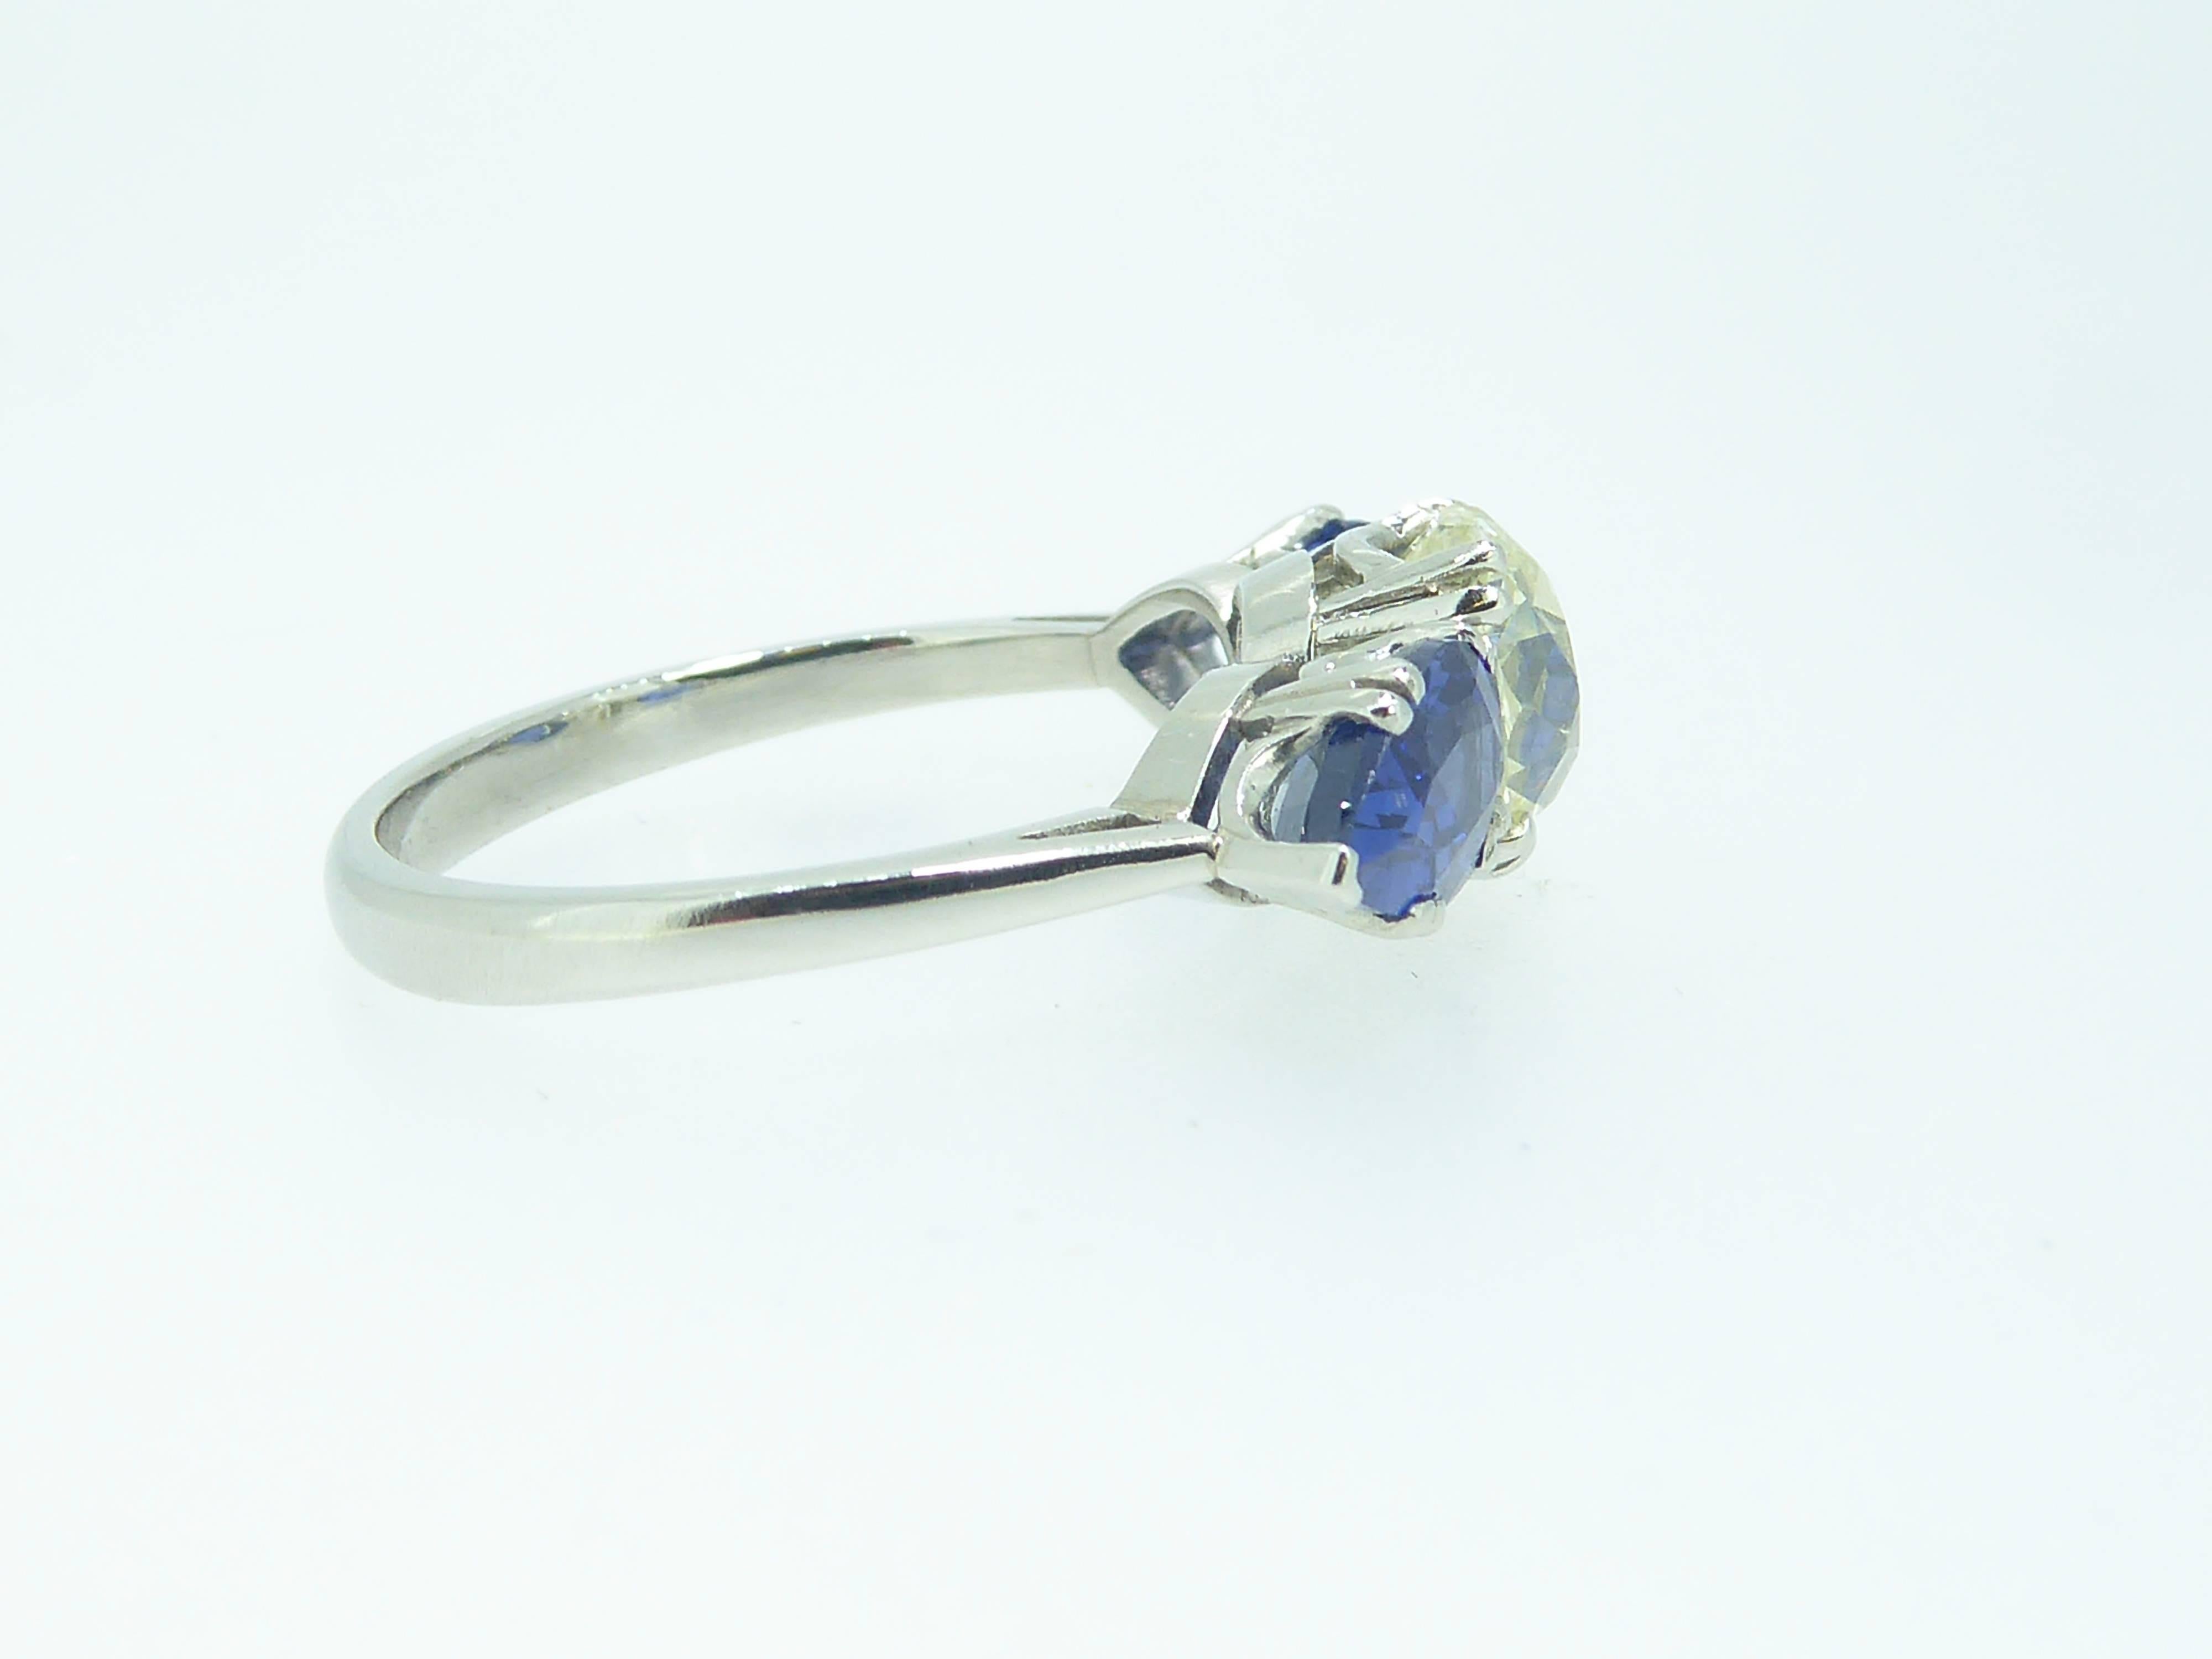 Details
    1 x old cushion cut diamond
    7.22mm x 6.44mm x 5.44mm
    1.90ct
    Assessed colour tinted, clarity VS1-VS2

    2 x pear shaped sapphires
    8.12mm long x 5.20mm wide (approx)
    2.44ct (total weight)
    Colour assessed as Good

